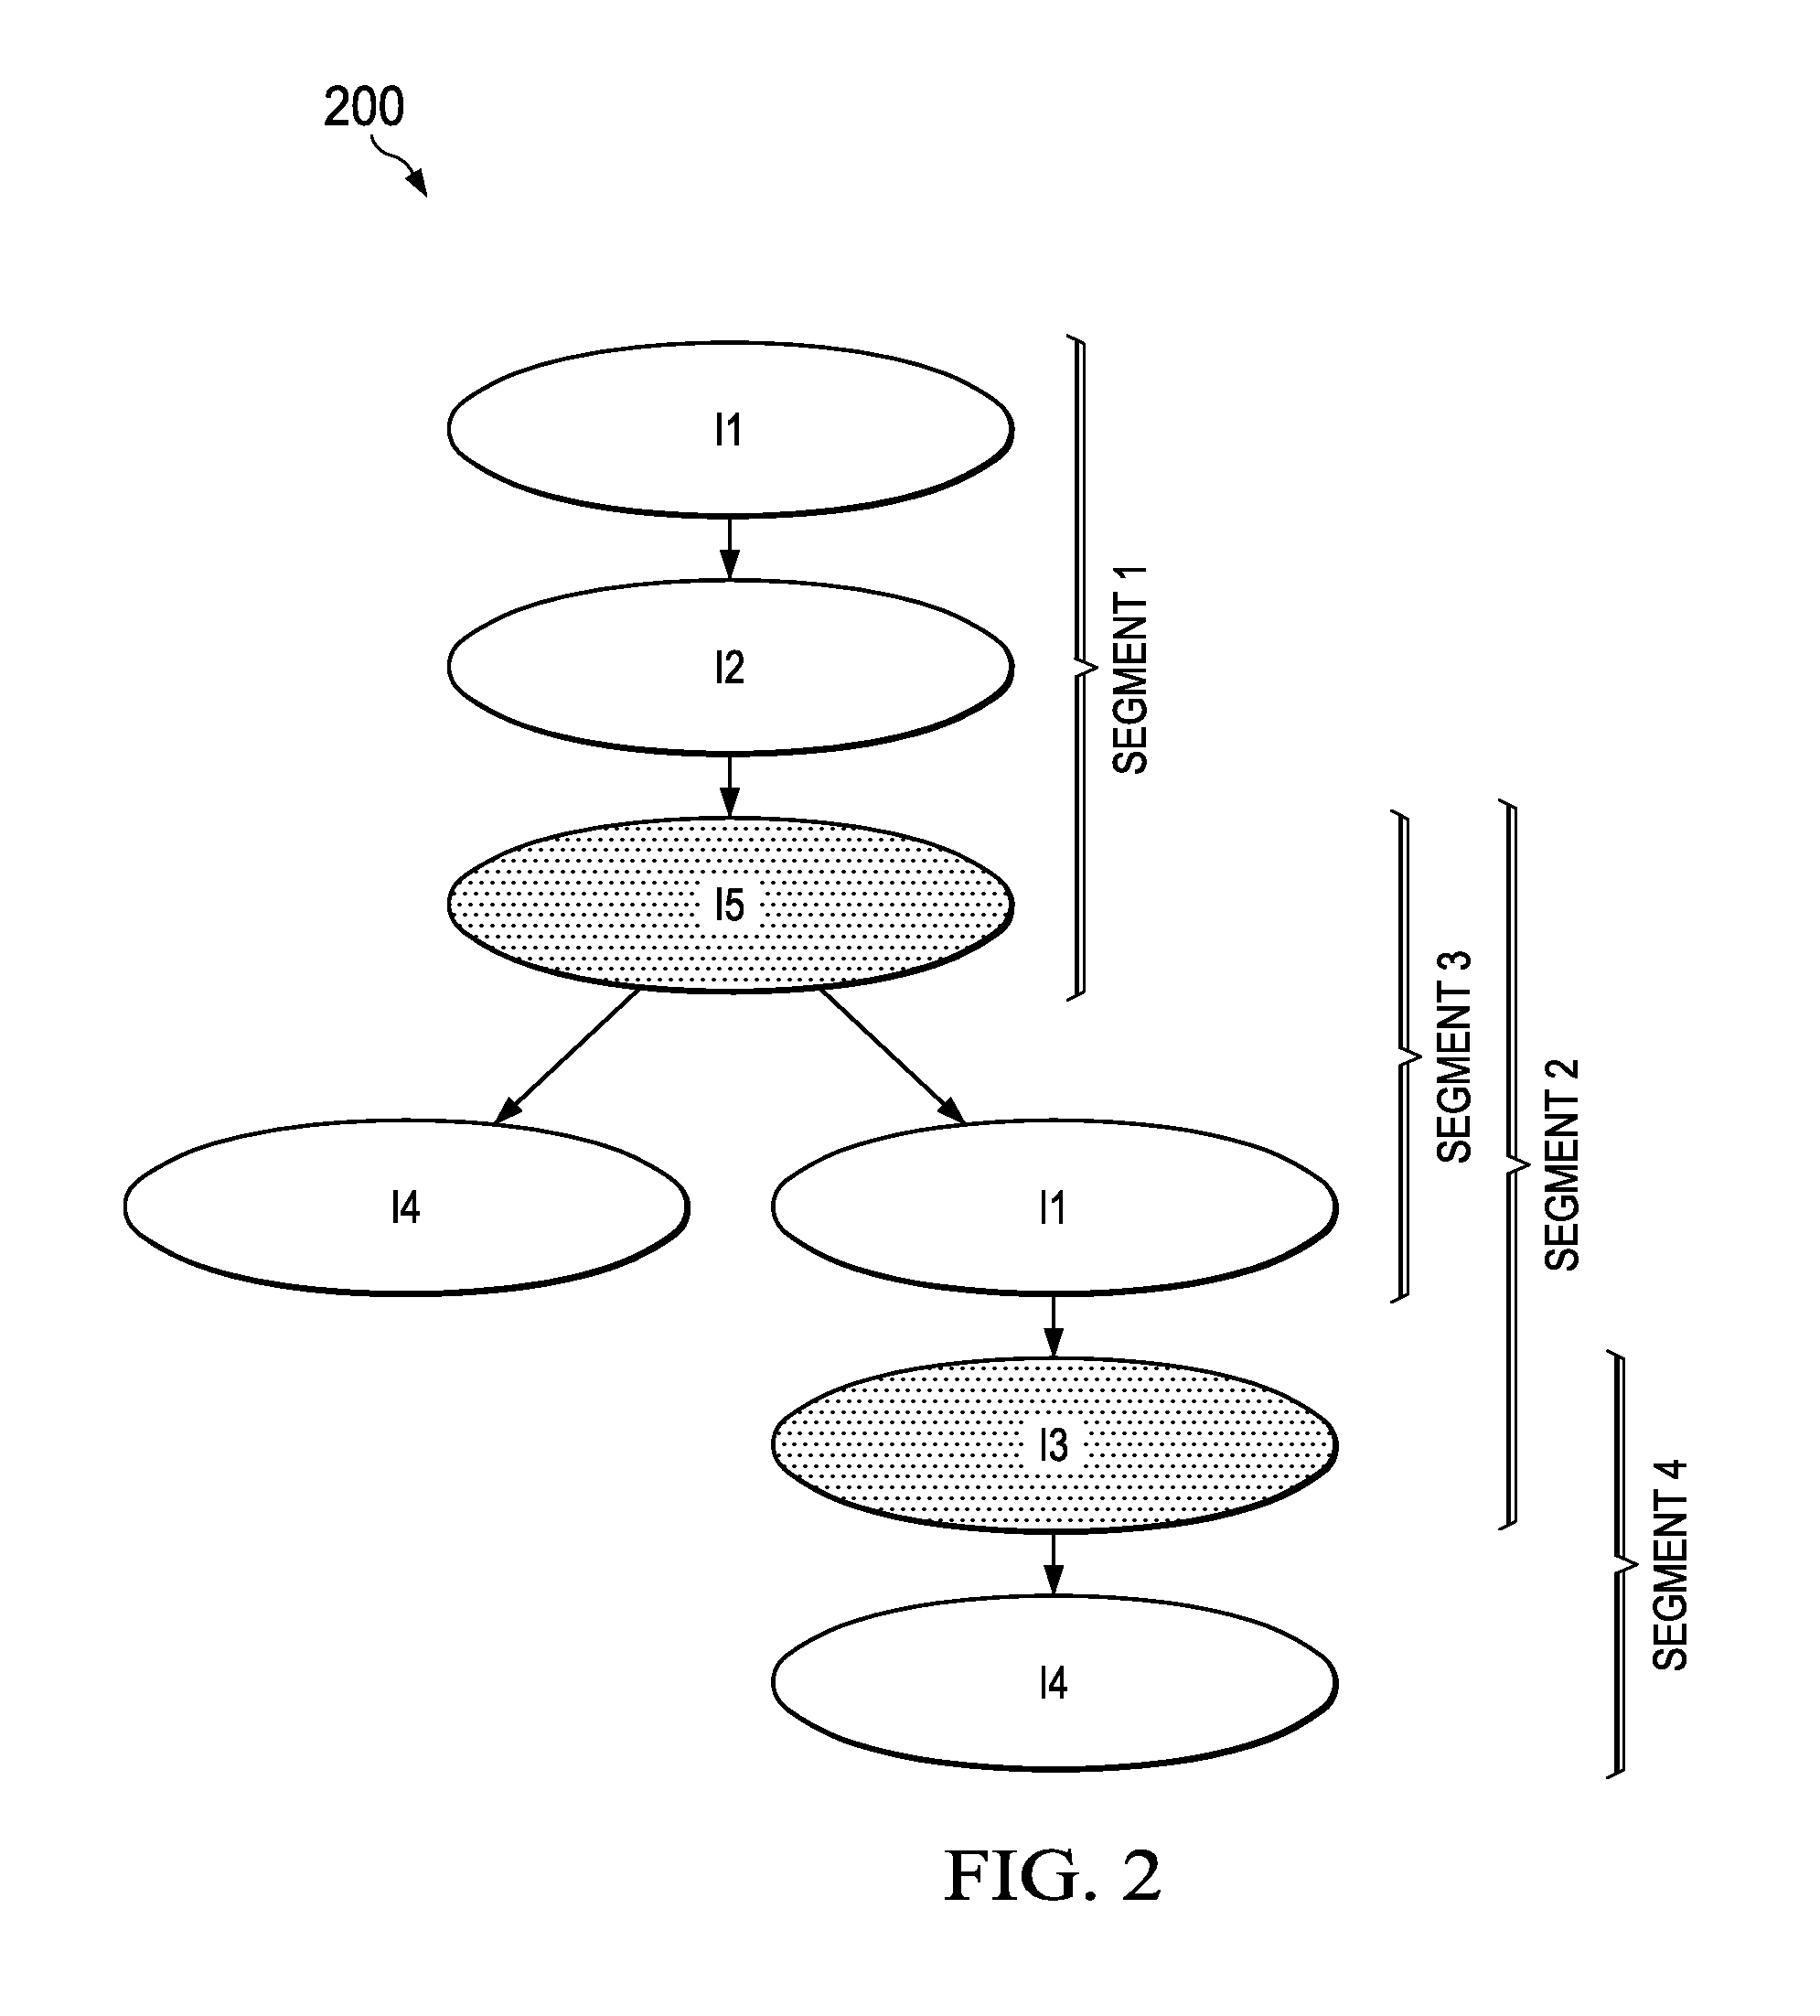 System and method for adaptive vector size selection for vectorized query execution